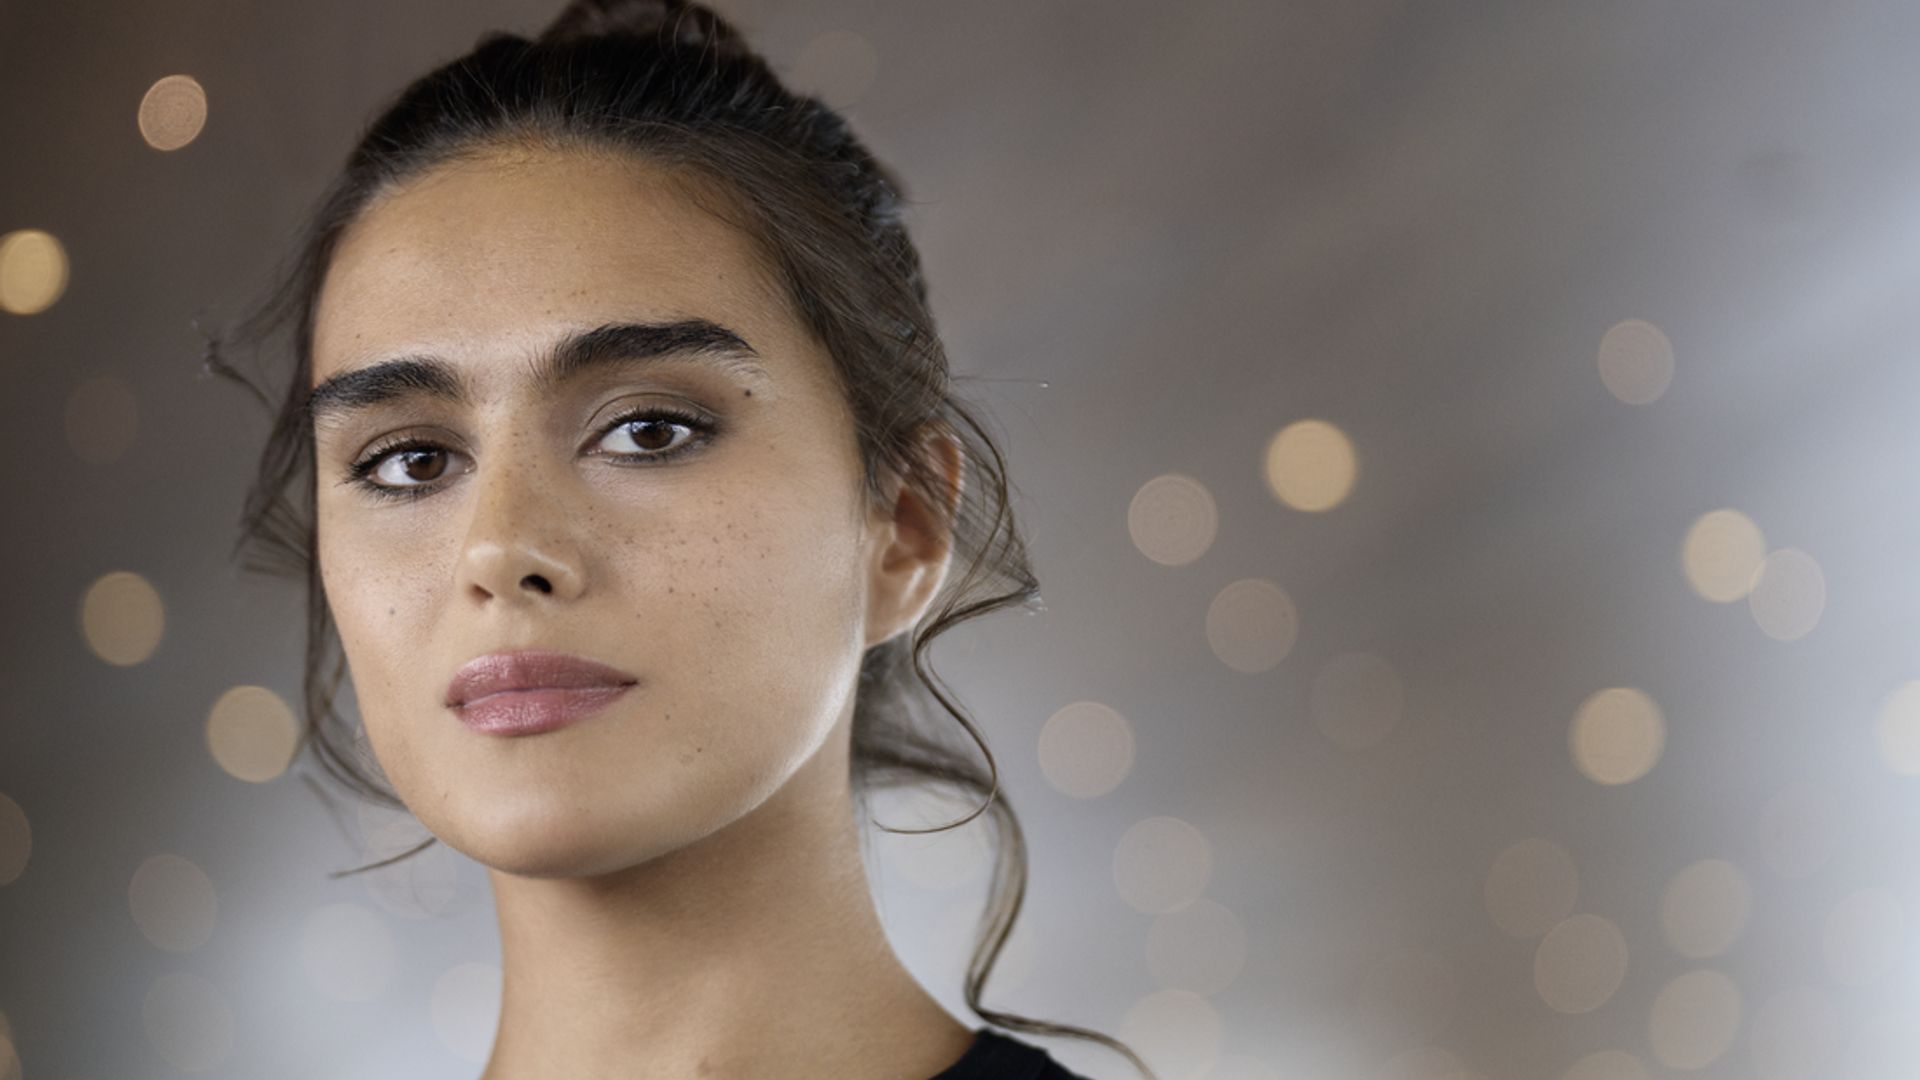 Chanel model with natural makeup and her hair in a messy bun 